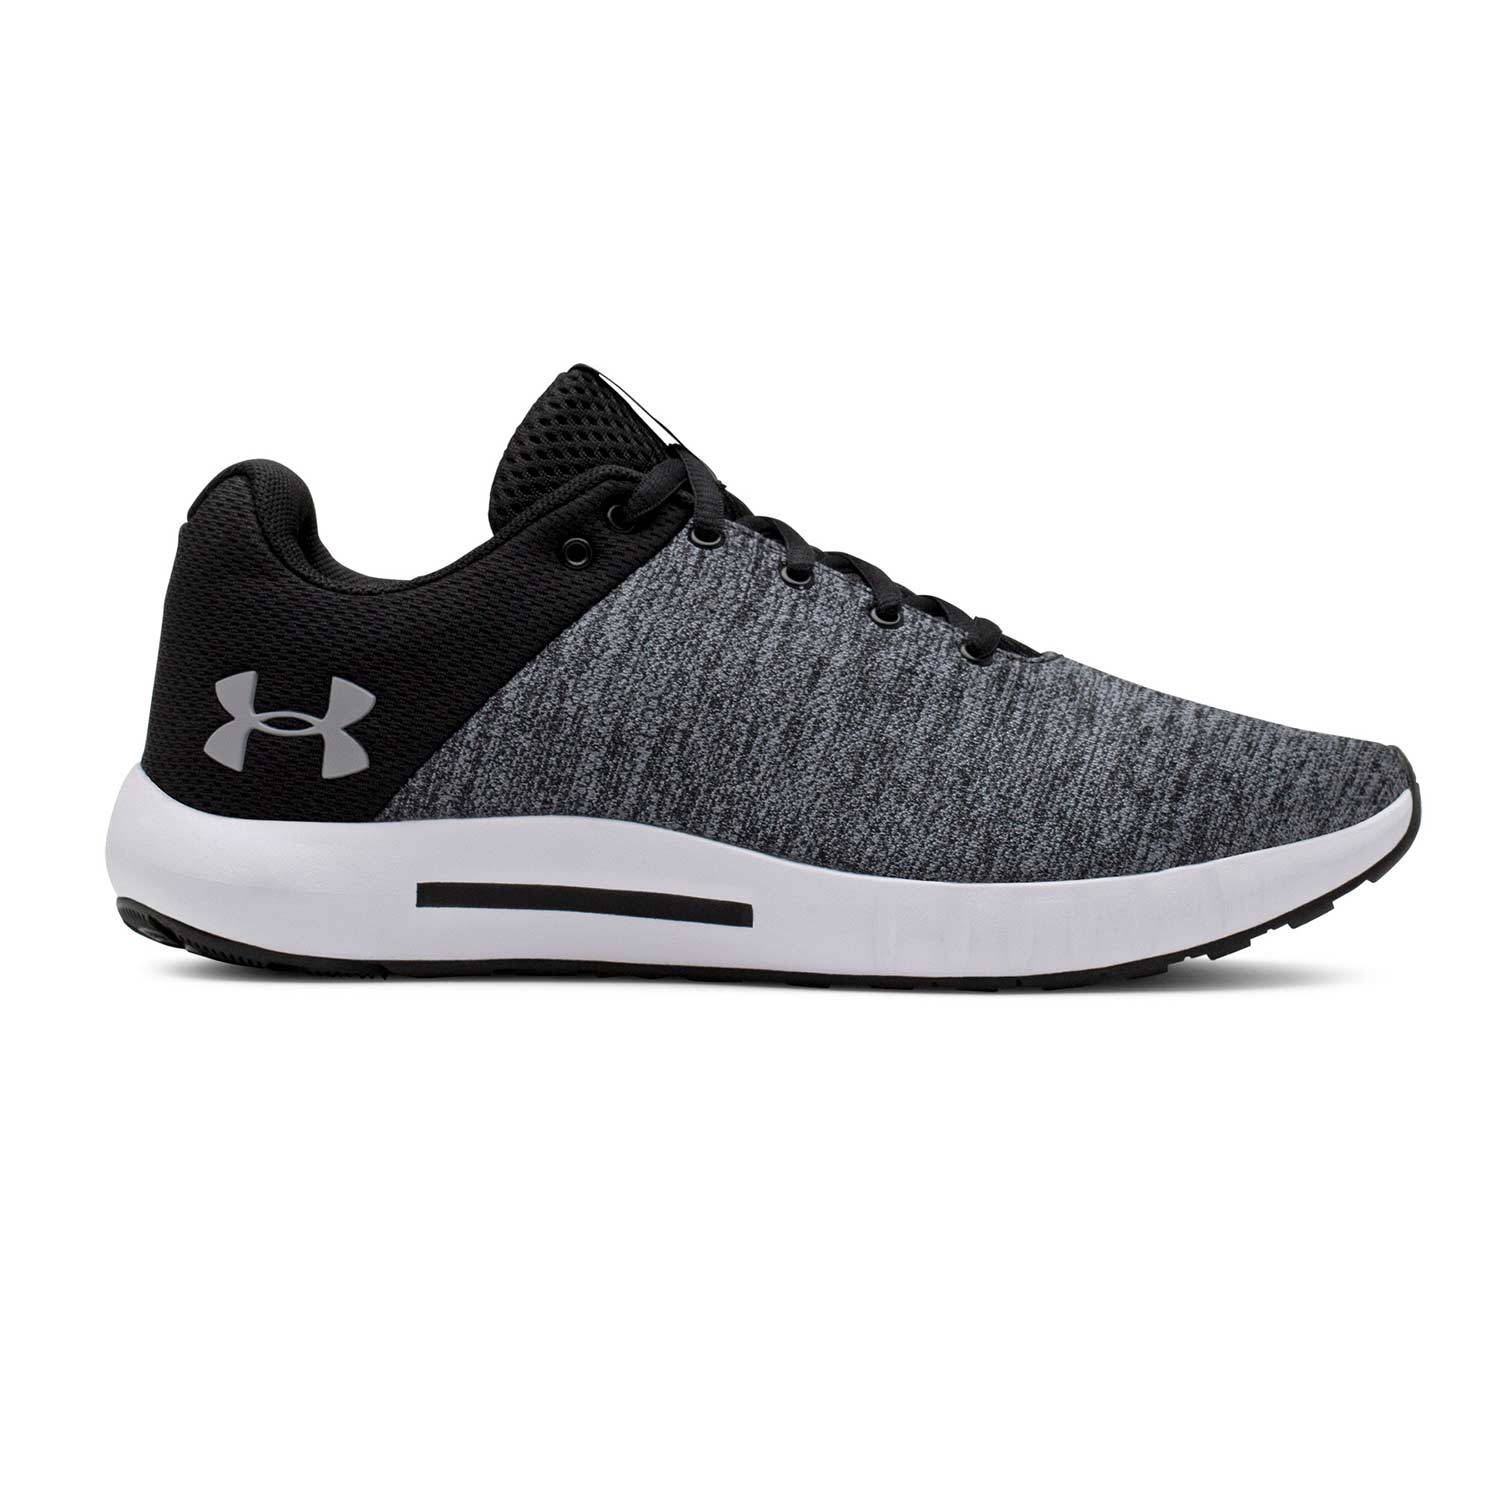 UNDER ARMOUR	WOMENS MICRO G PURSUIT TWIST RUNNING SHOES